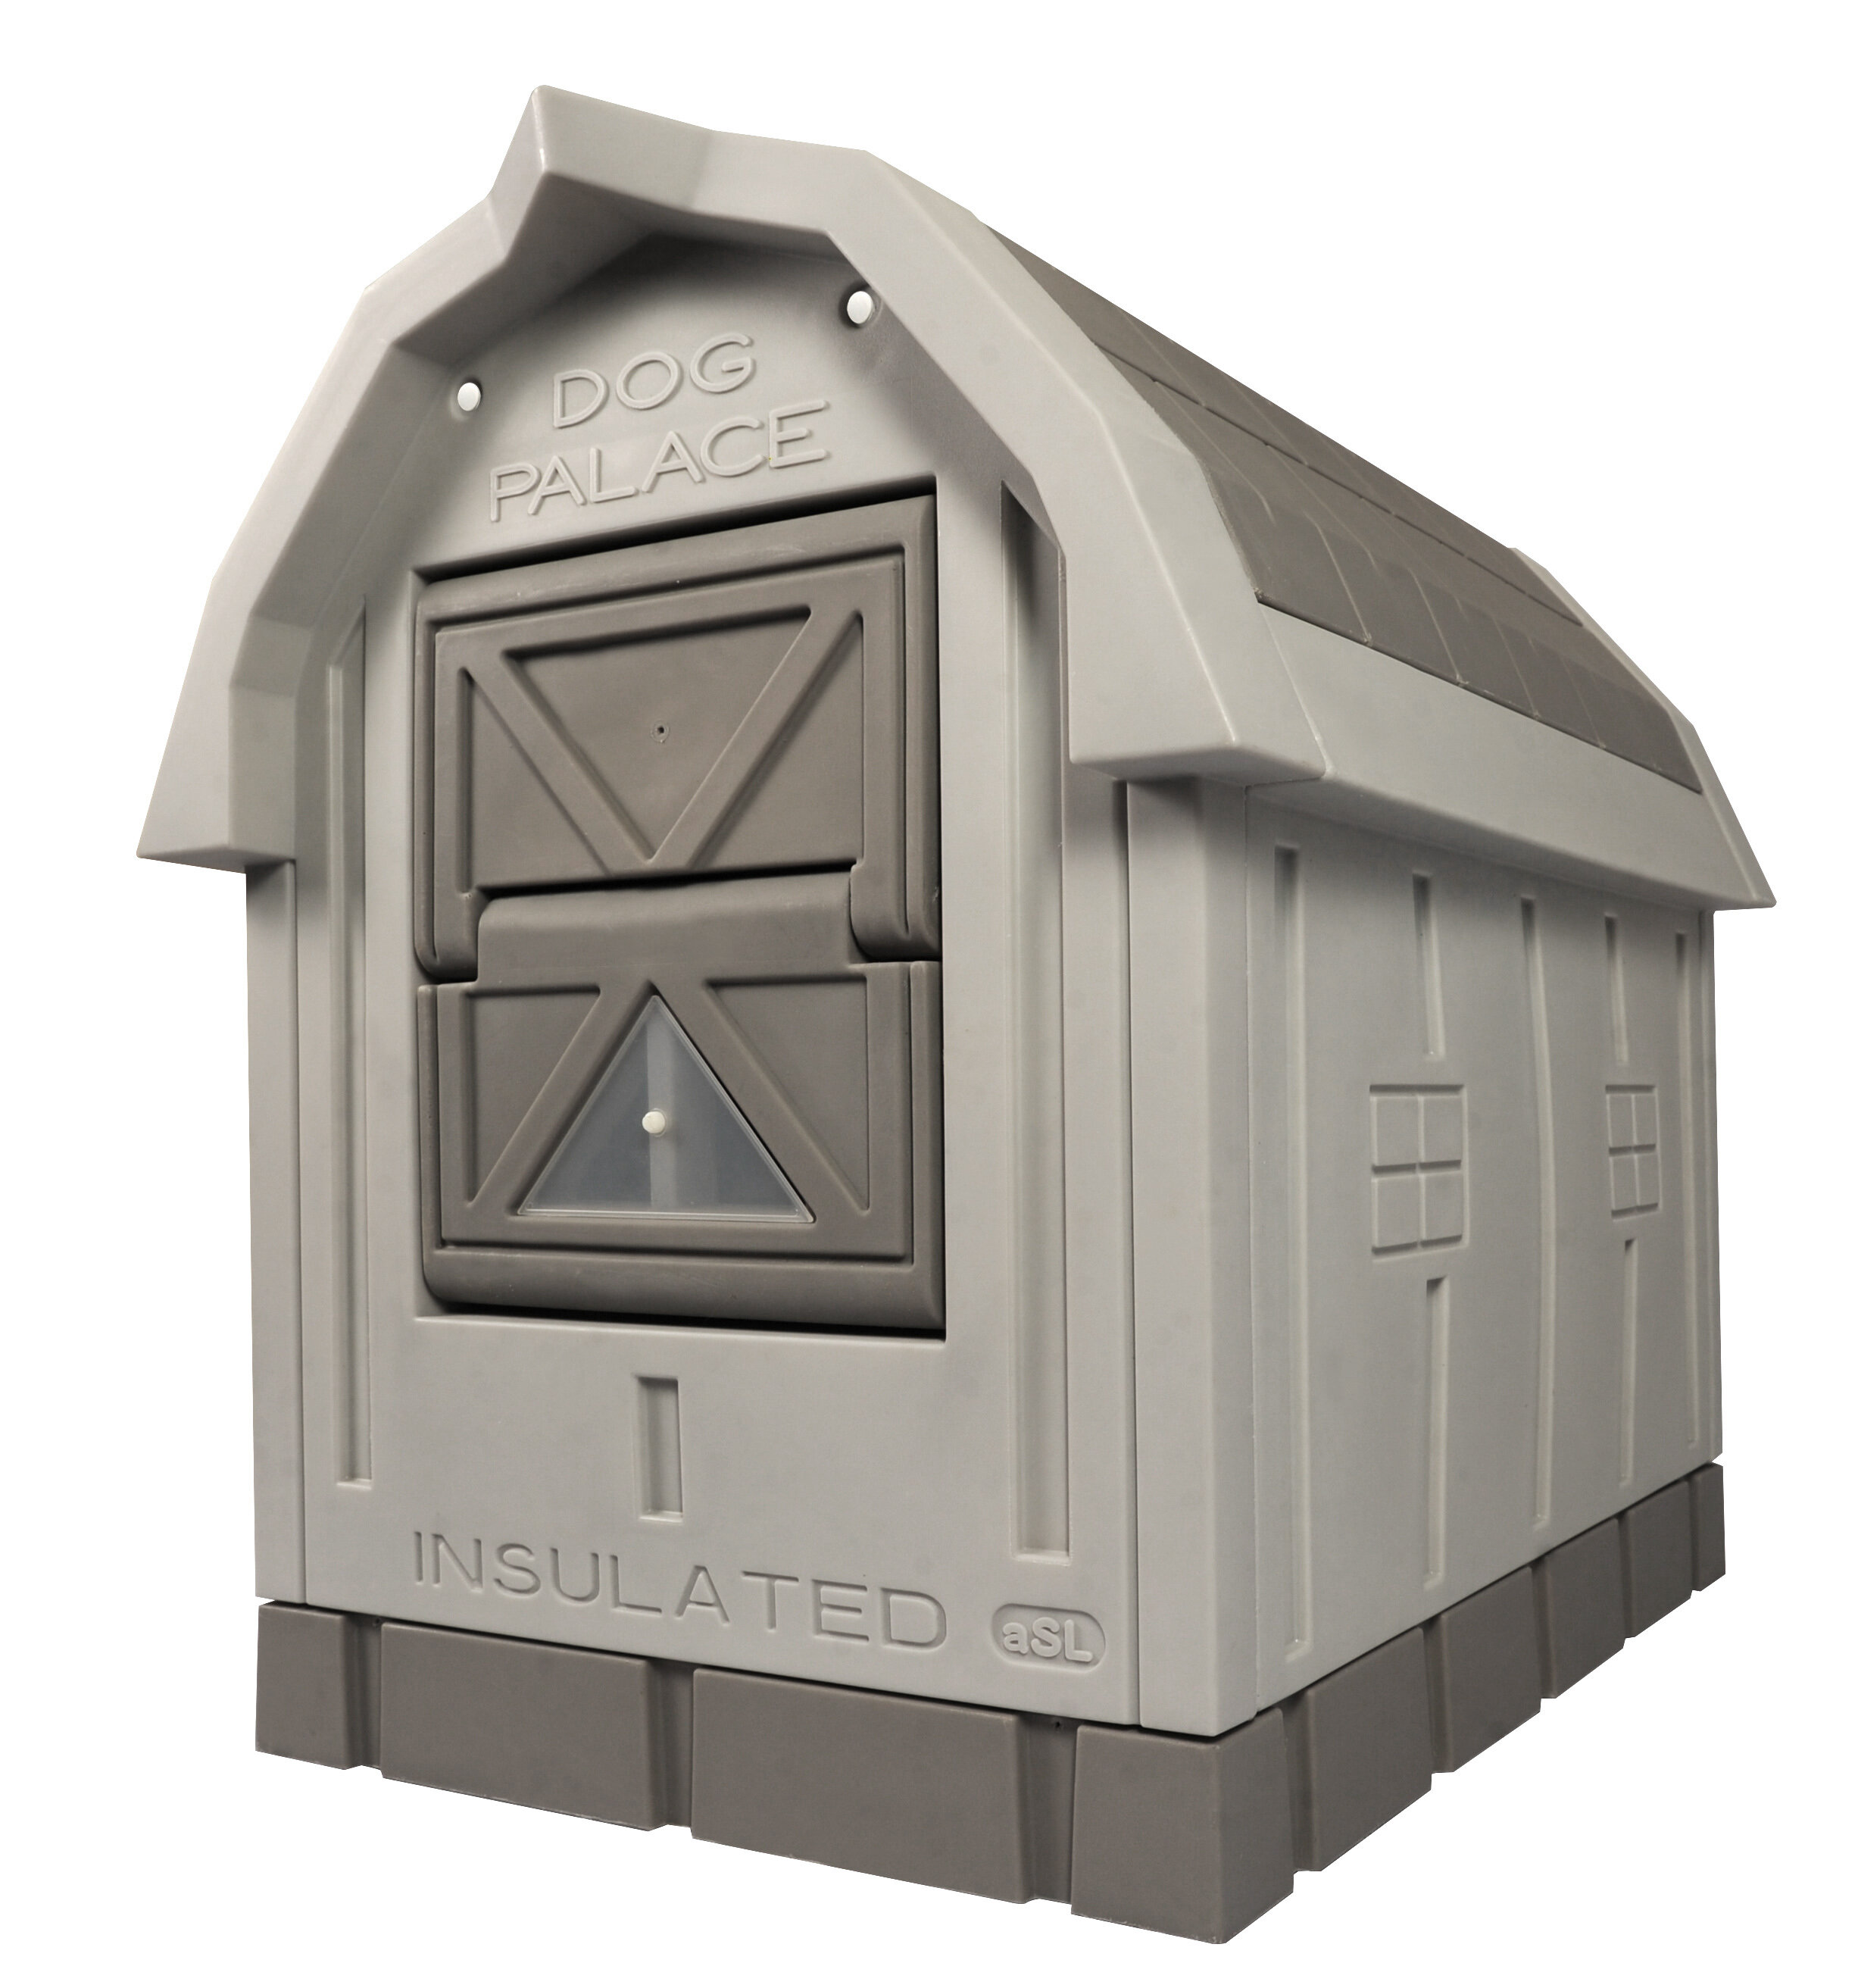 campa solid wood dog house